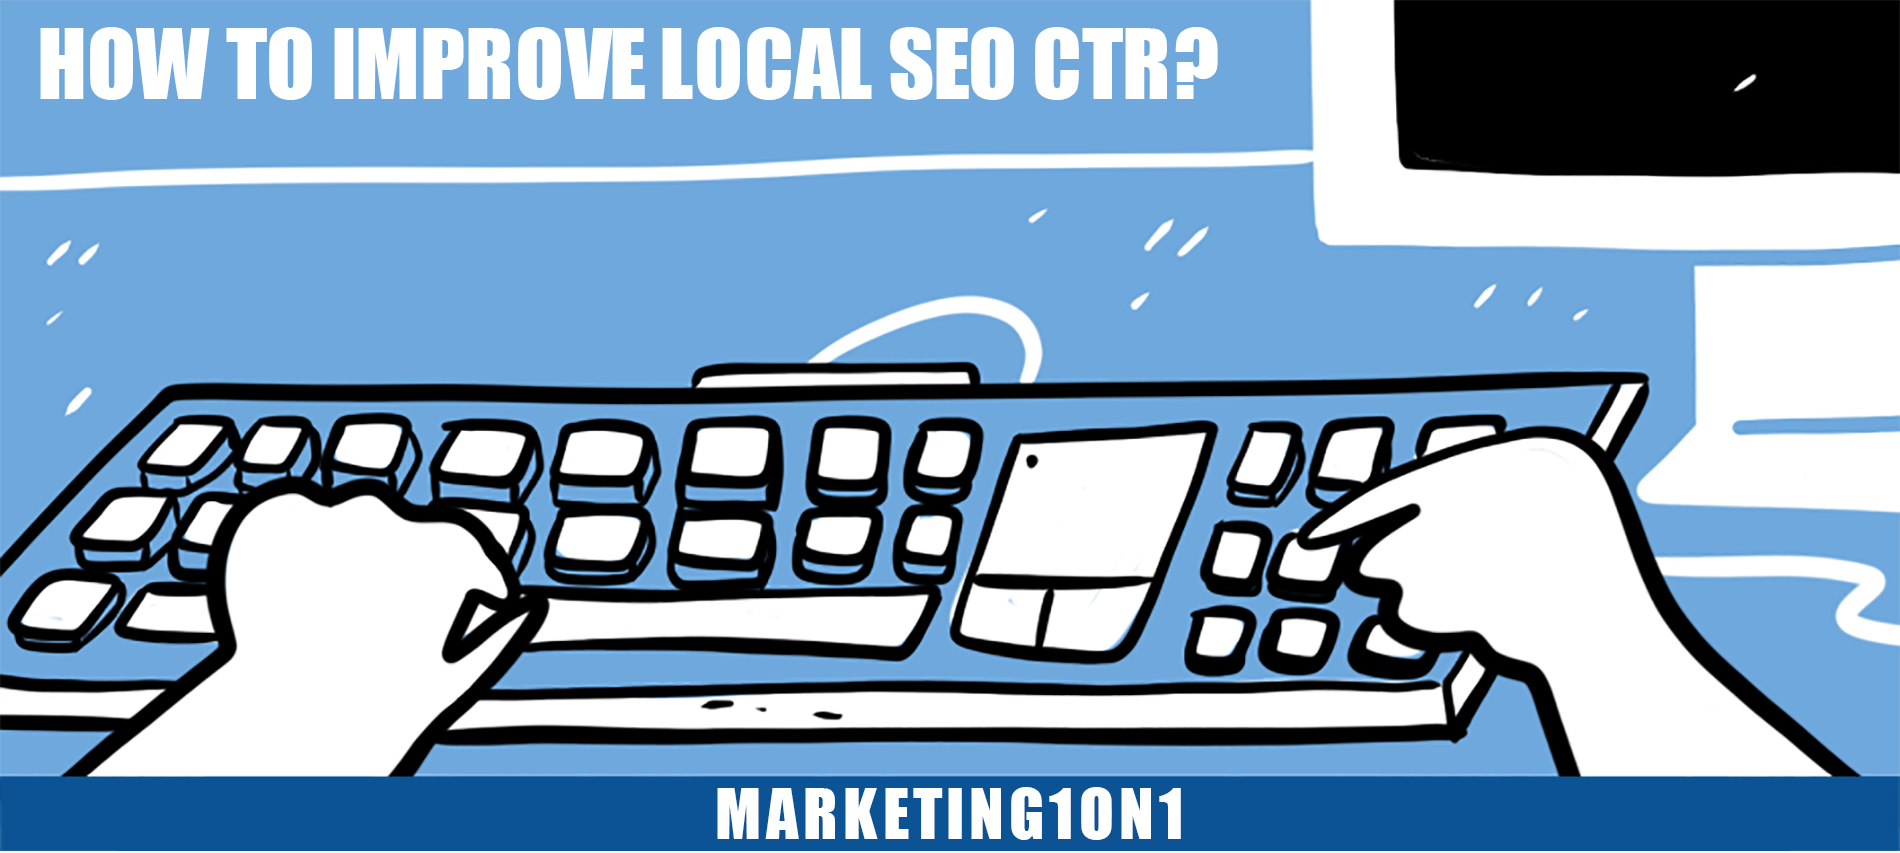 How to improve local SEO CTR?